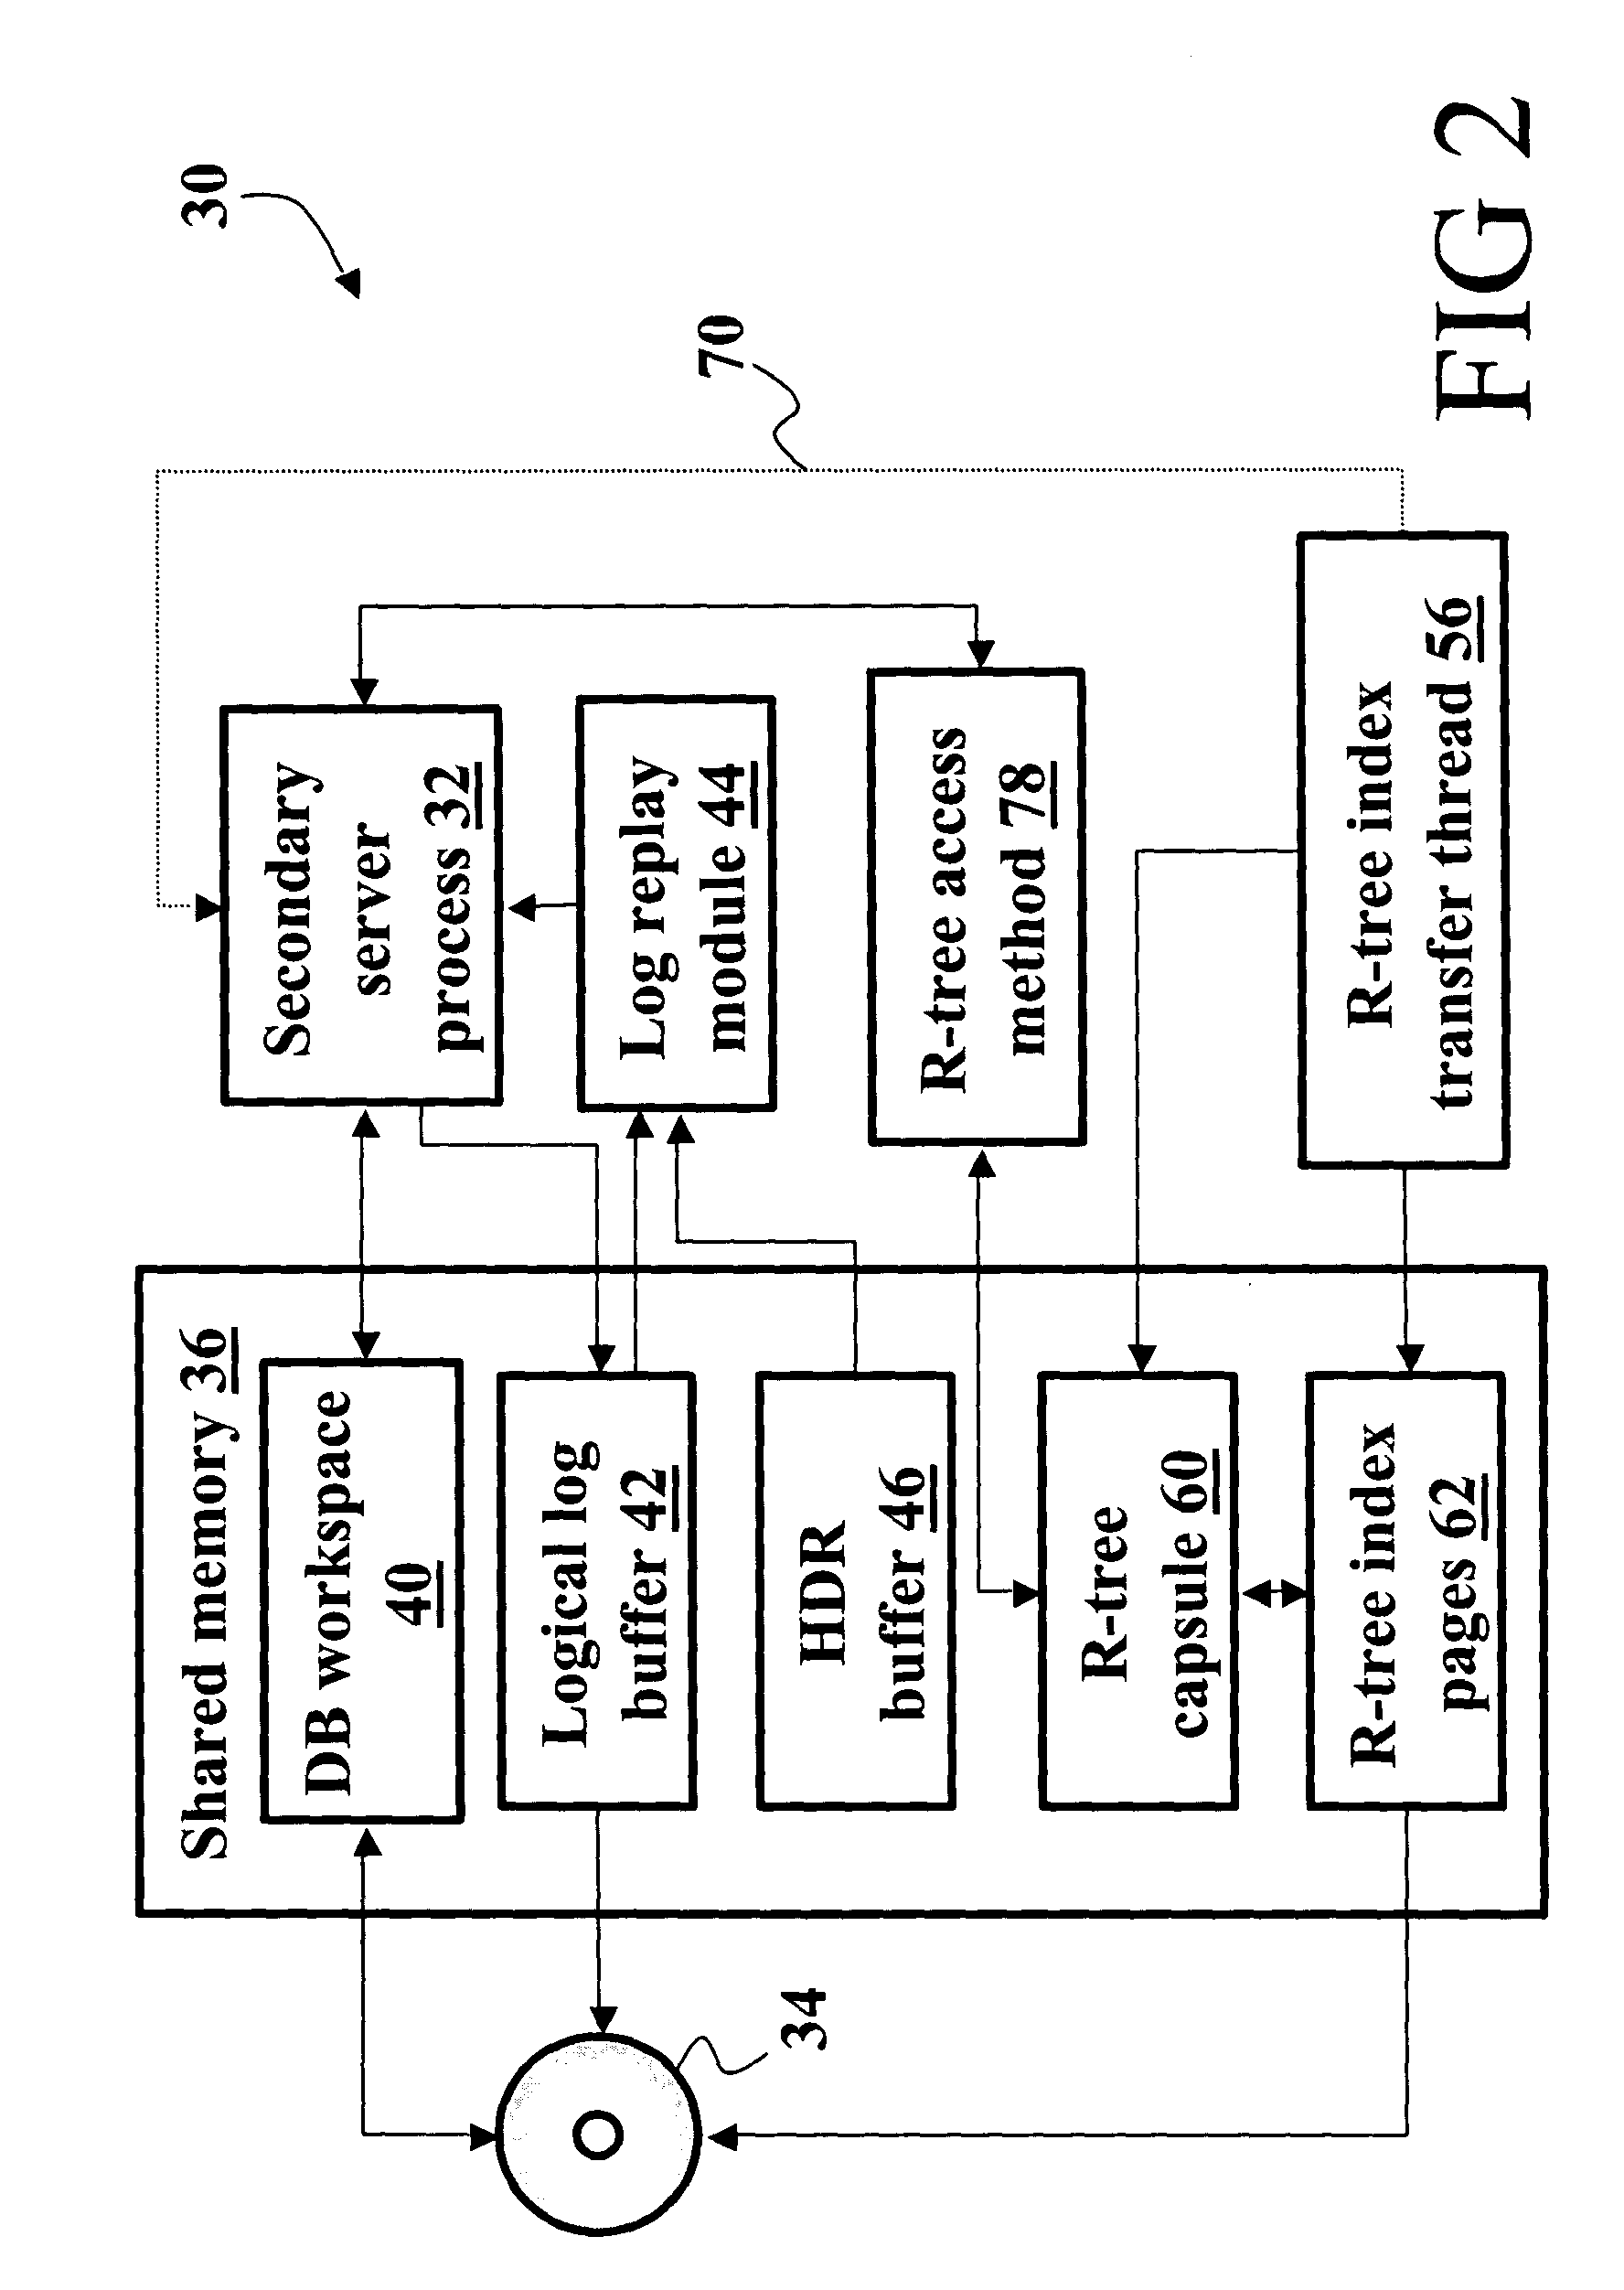 Database backup system using data and user-defined routines replicators for maintaining a copy of database on a secondary server